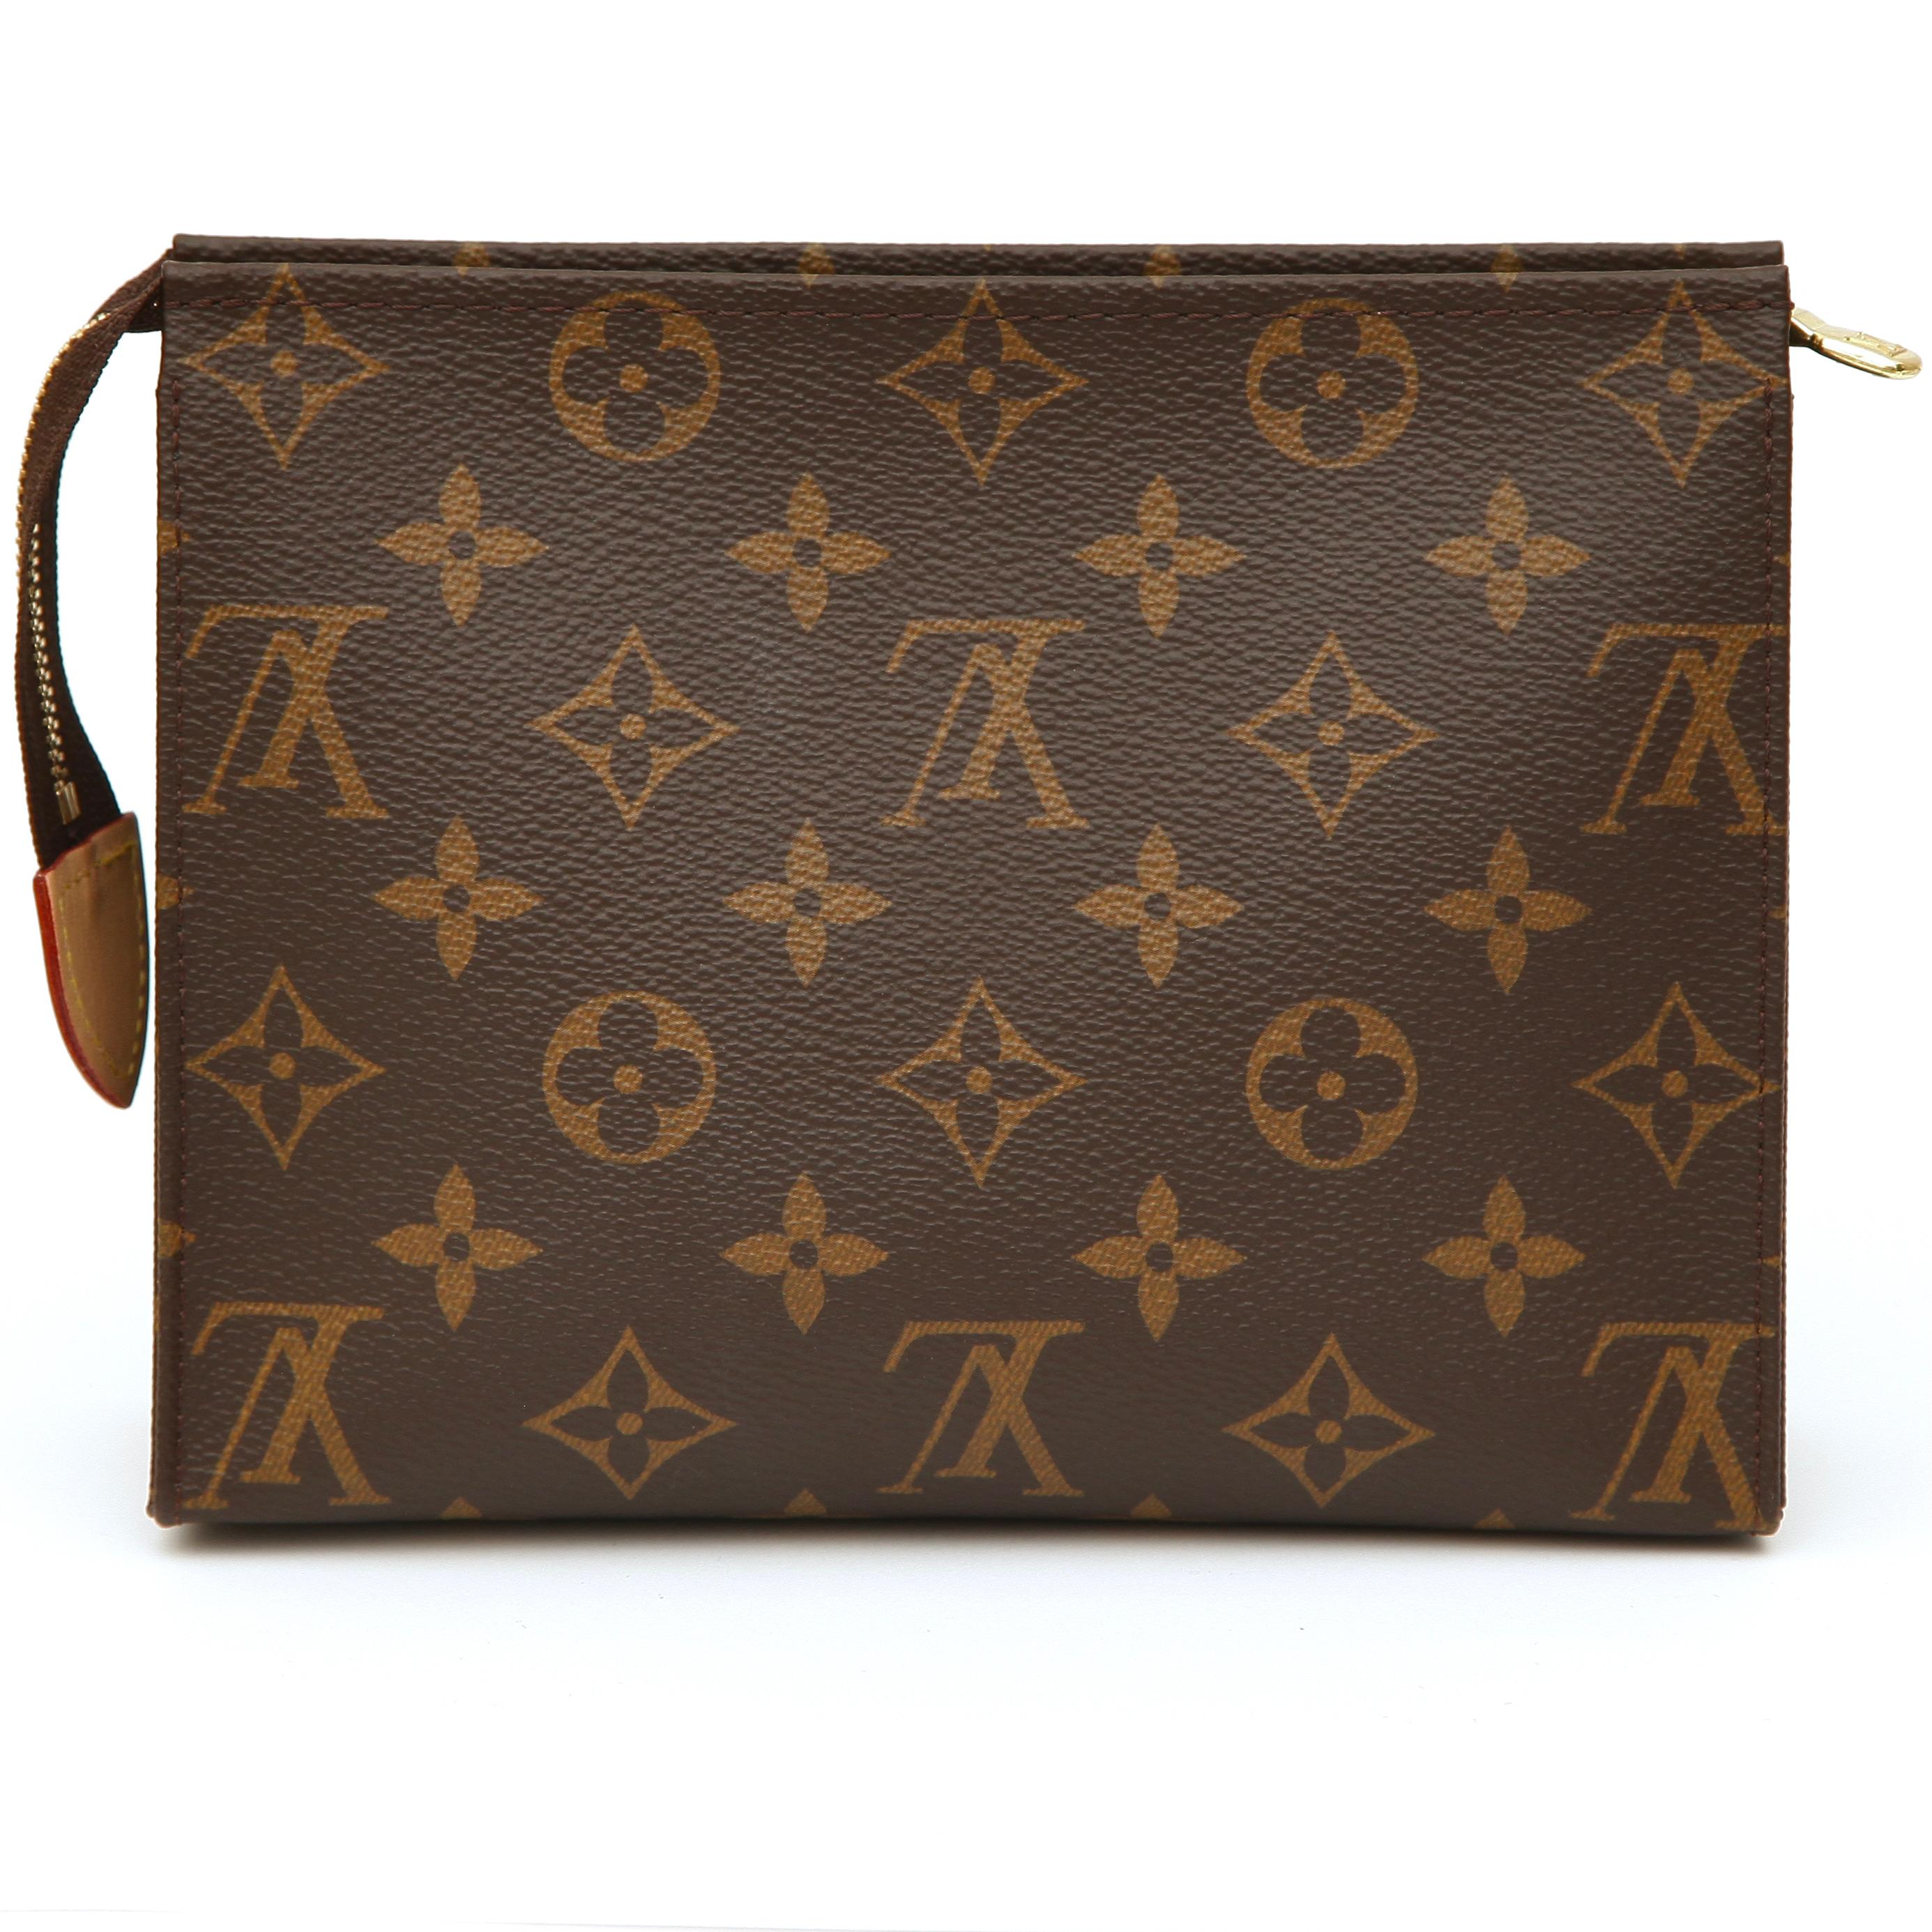 GUARANTEED AUTHENTIC LOUIS VUITTON MONOGRAM TOILETRY POUCH 19


Design: 
  - Brown monogram canvas exterior.
   - Brass top zipper closure.
  - Beige interior.
  - Interior one main compartment.
  - Signature leather plaque at the end of the